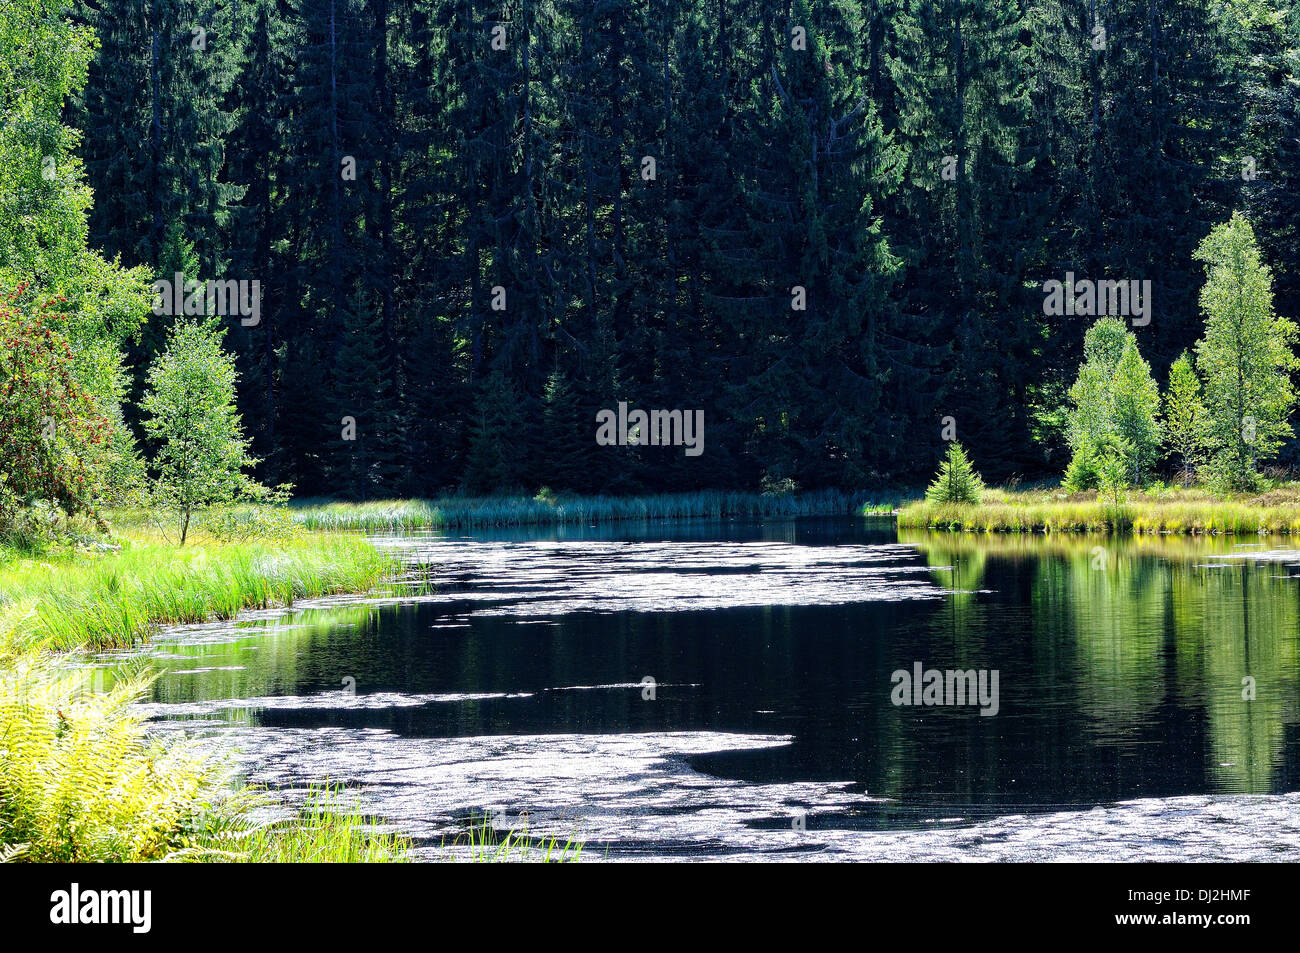 Buhlbachsee in the Black Forest Germany Stock Photo